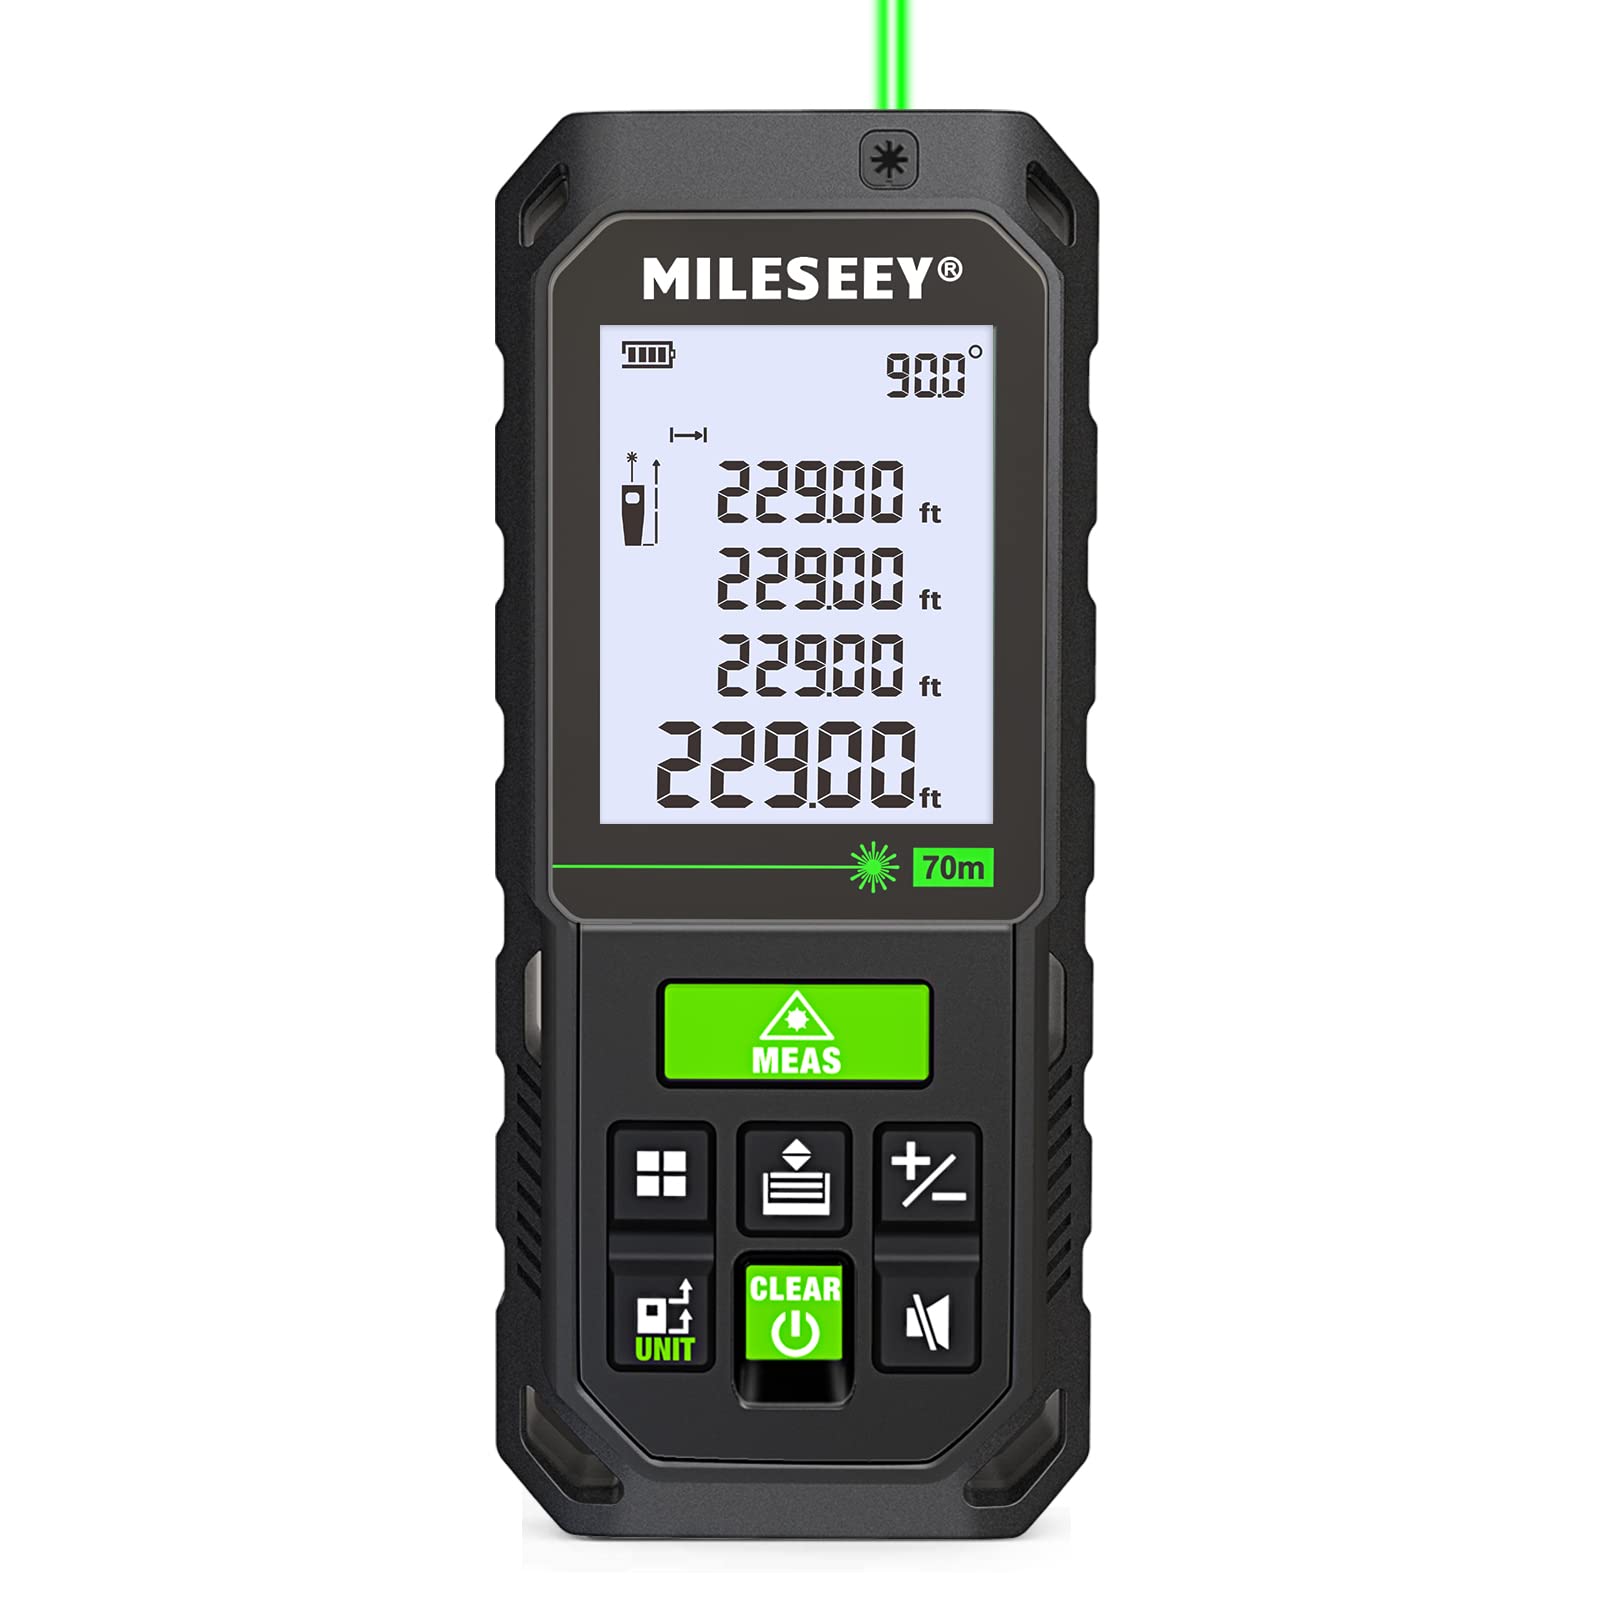 Mileseey S8GA Laser Measure Green Beam 230 ft, Laser Tape Measure with Angle Sensor IP65, Pythagorean, Distance, Area, Volume Measuring, ±1/16in Accuracy, Laser Measurement Tool